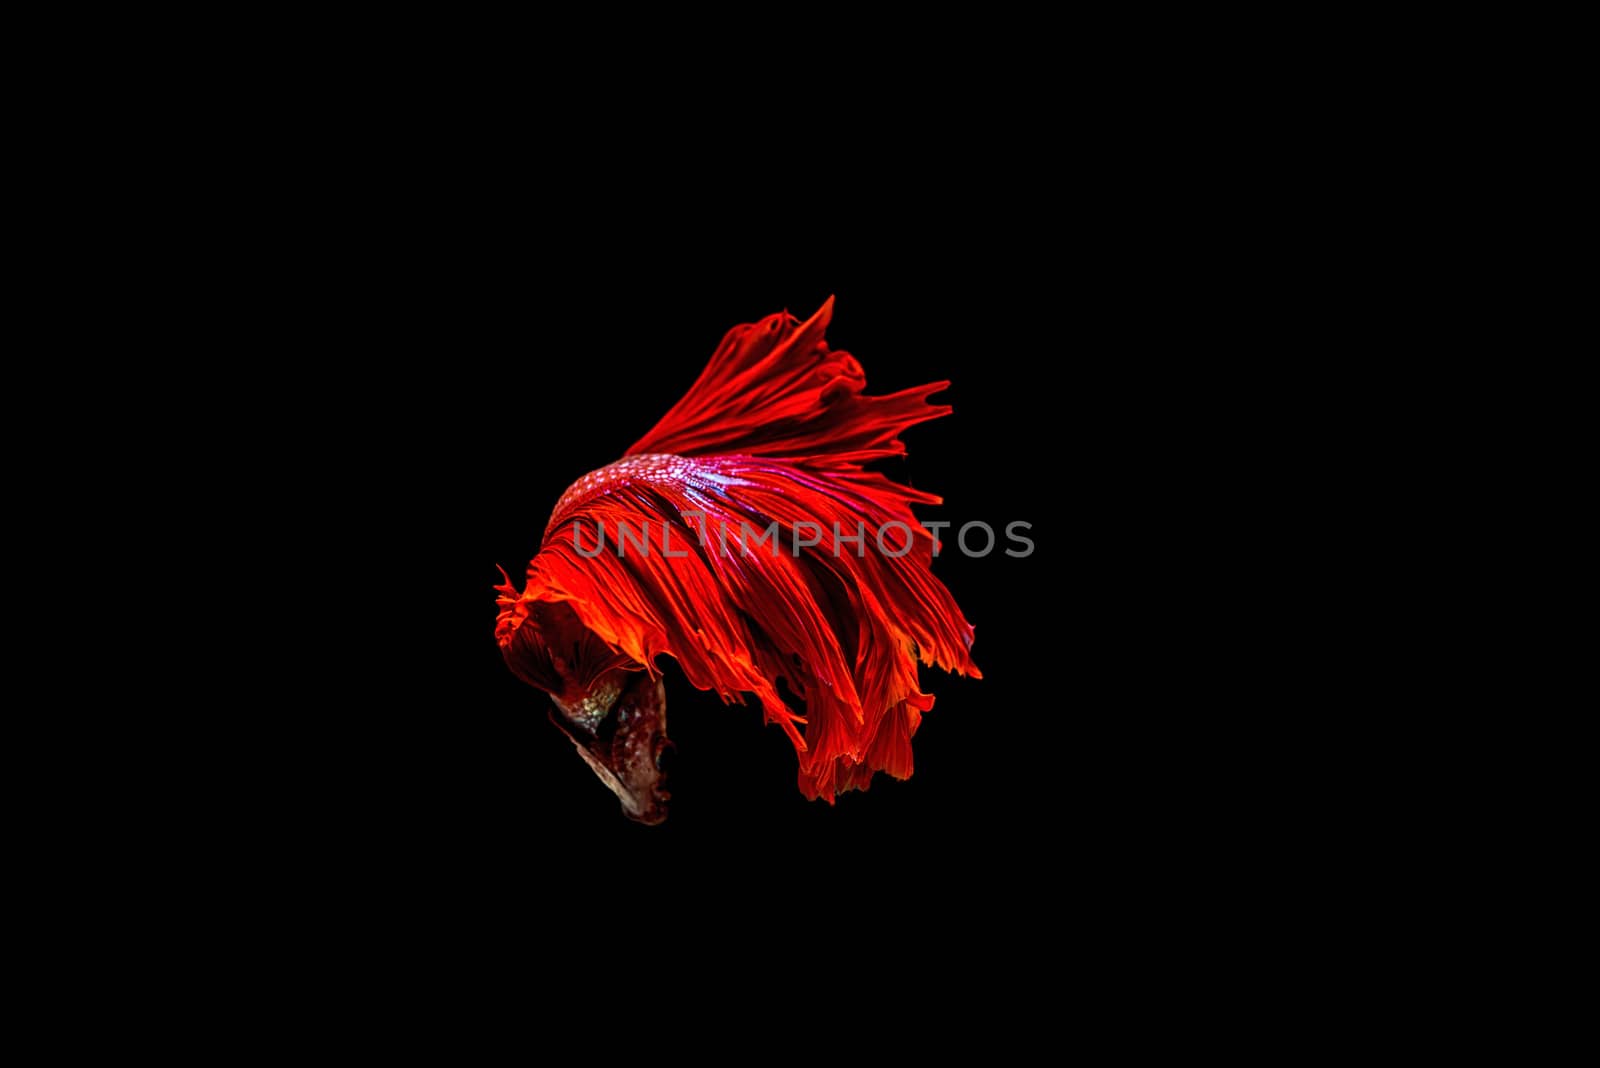 siamese fighting fish isolated on black background. by chanwity